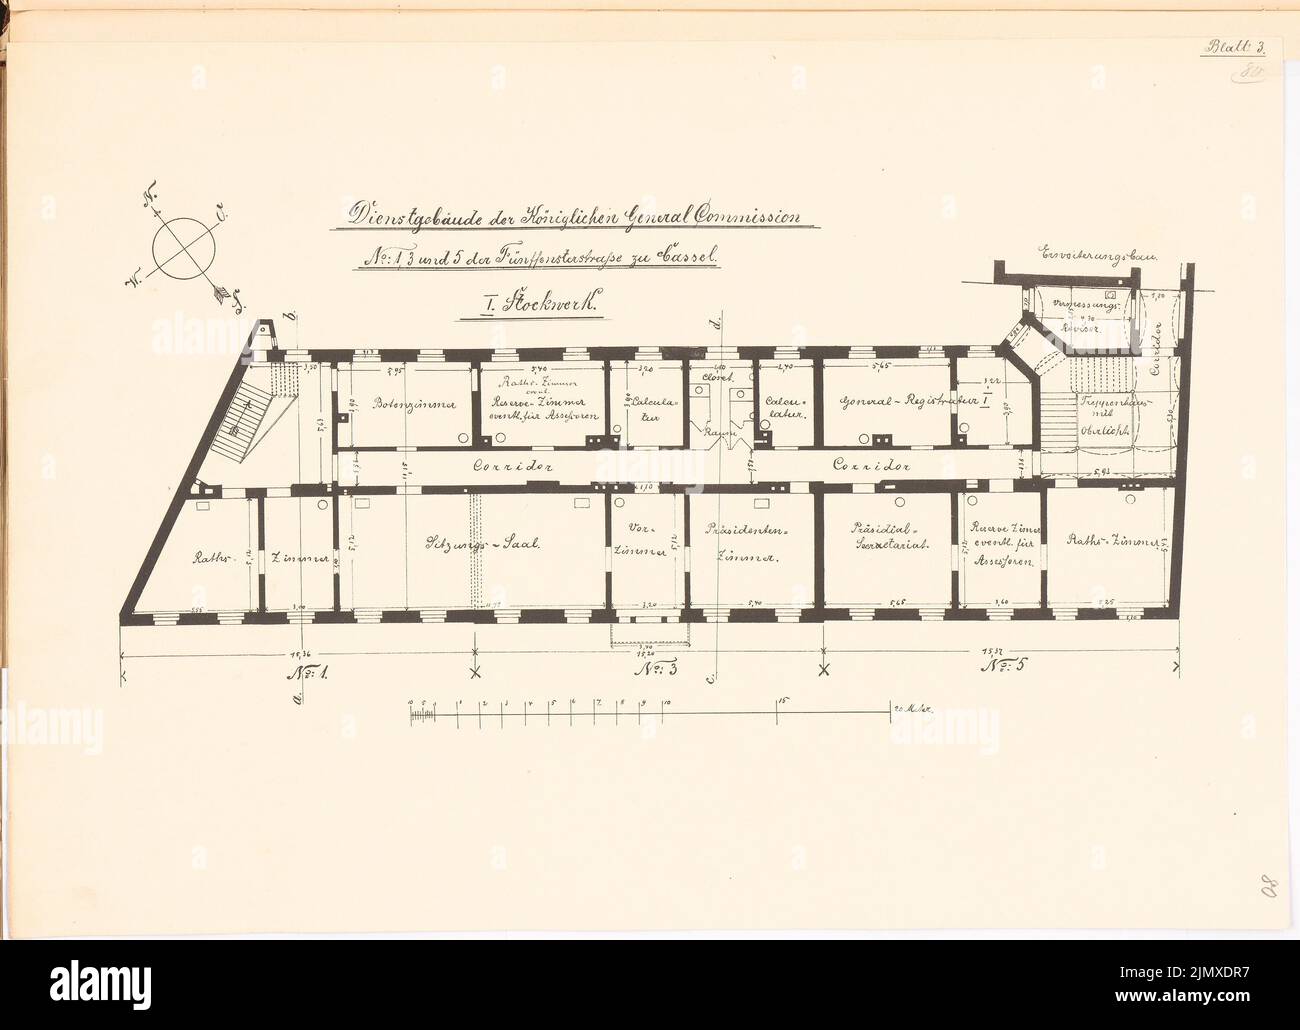 Unknown architect, Service building of the General Commission, Kassel (approx. 1886/1887): Plan content N.N. detected. Lithograph on paper, 41 x 56.7 cm (including scan edges) N.N. : Dienstgebäude der General-Kommission, Kassel Stock Photo